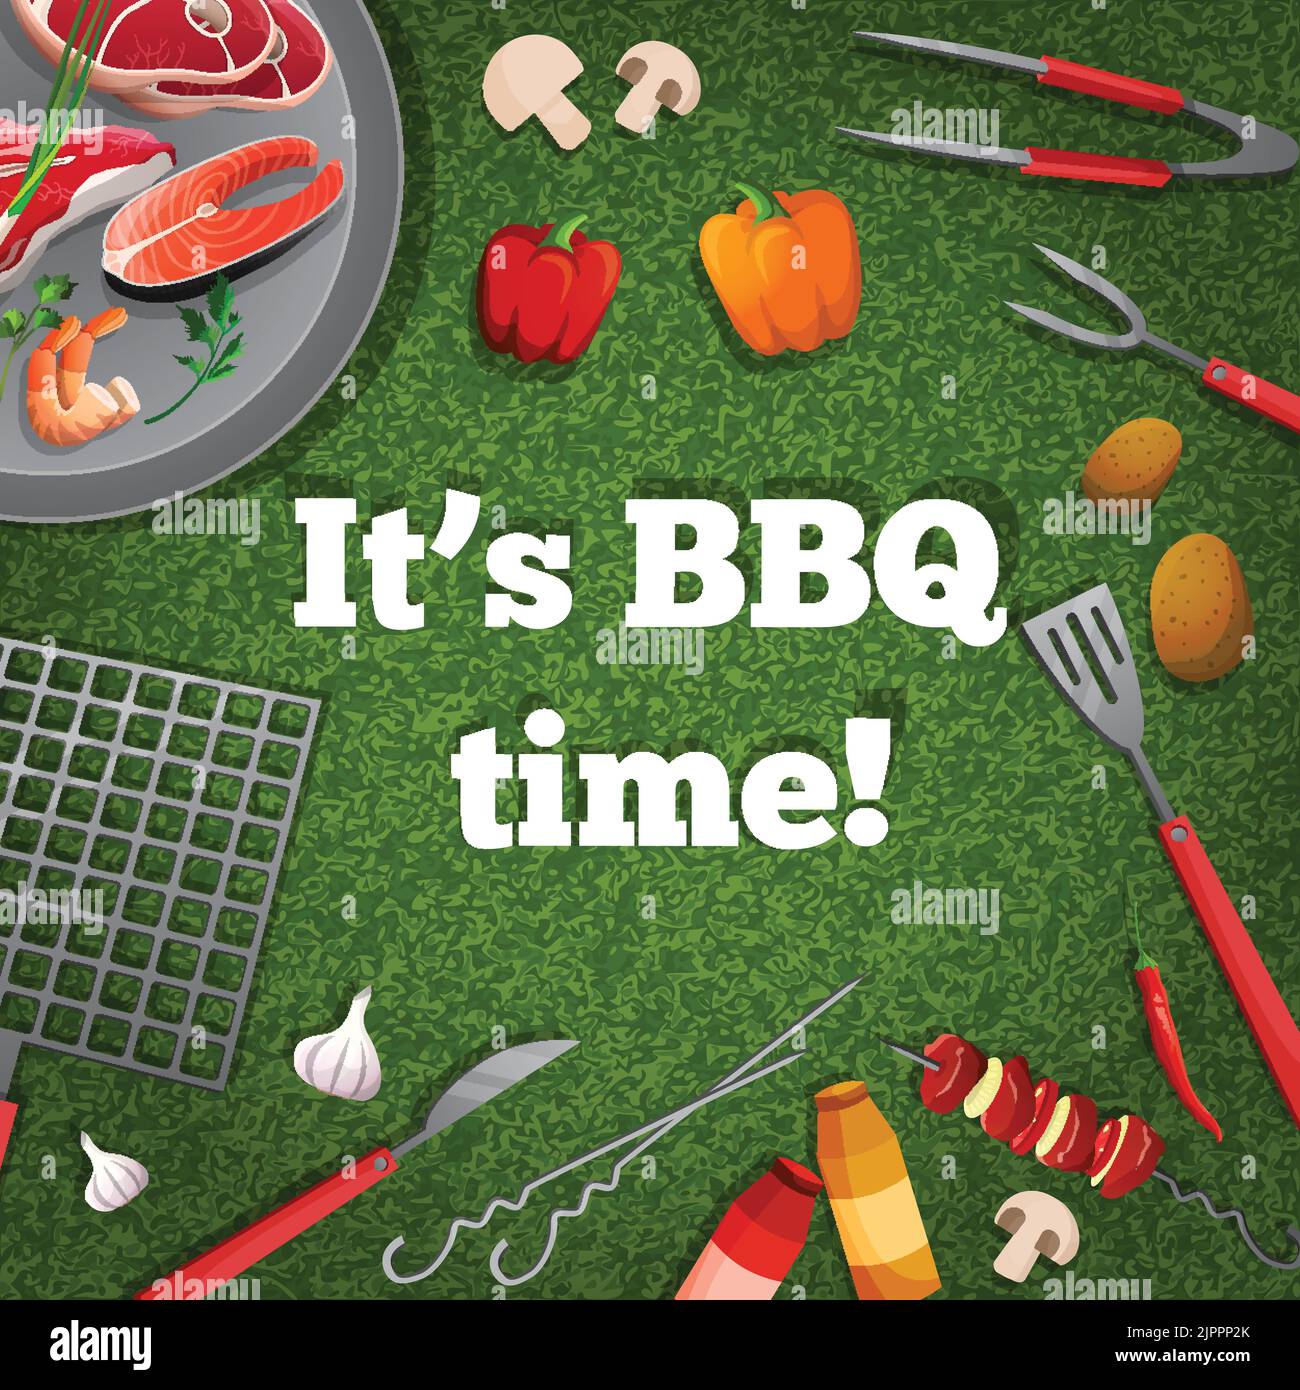 Bbq barbecue grill picnic poster with meat fish vegetables vector illustration Stock Vector